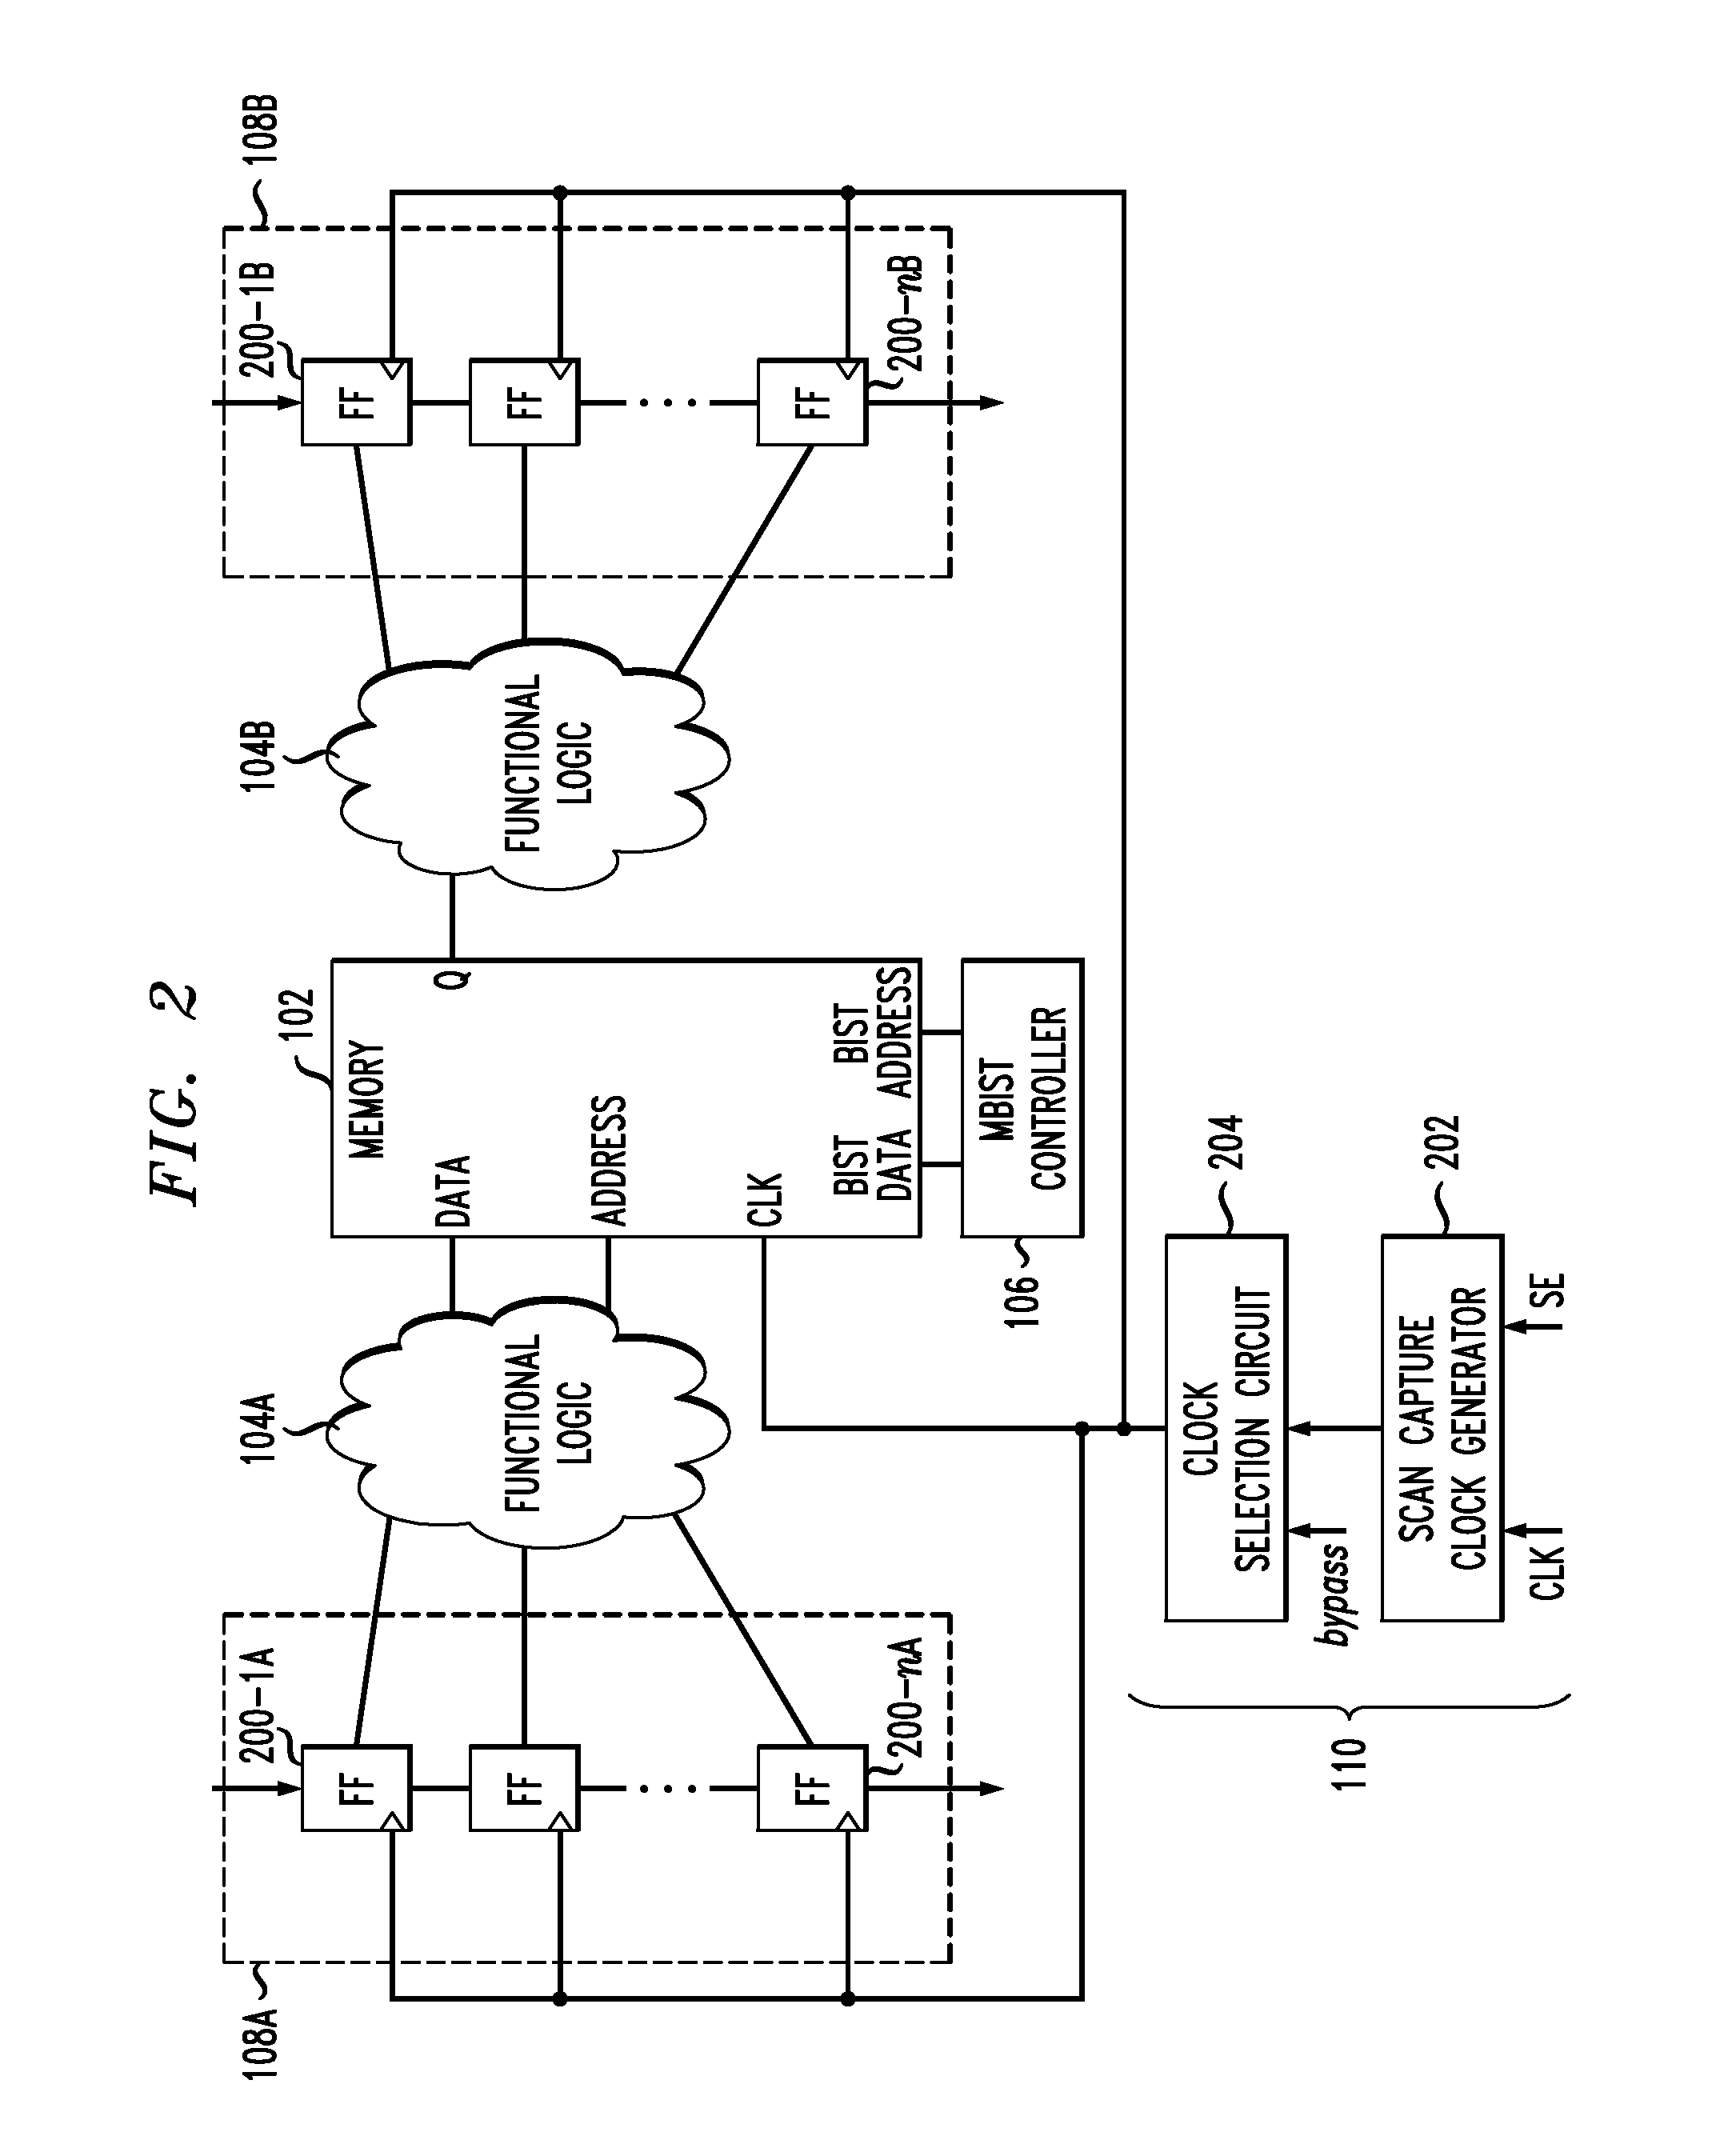 Integrated circuit comprising scan test circuitry with controllable number of capture pulses